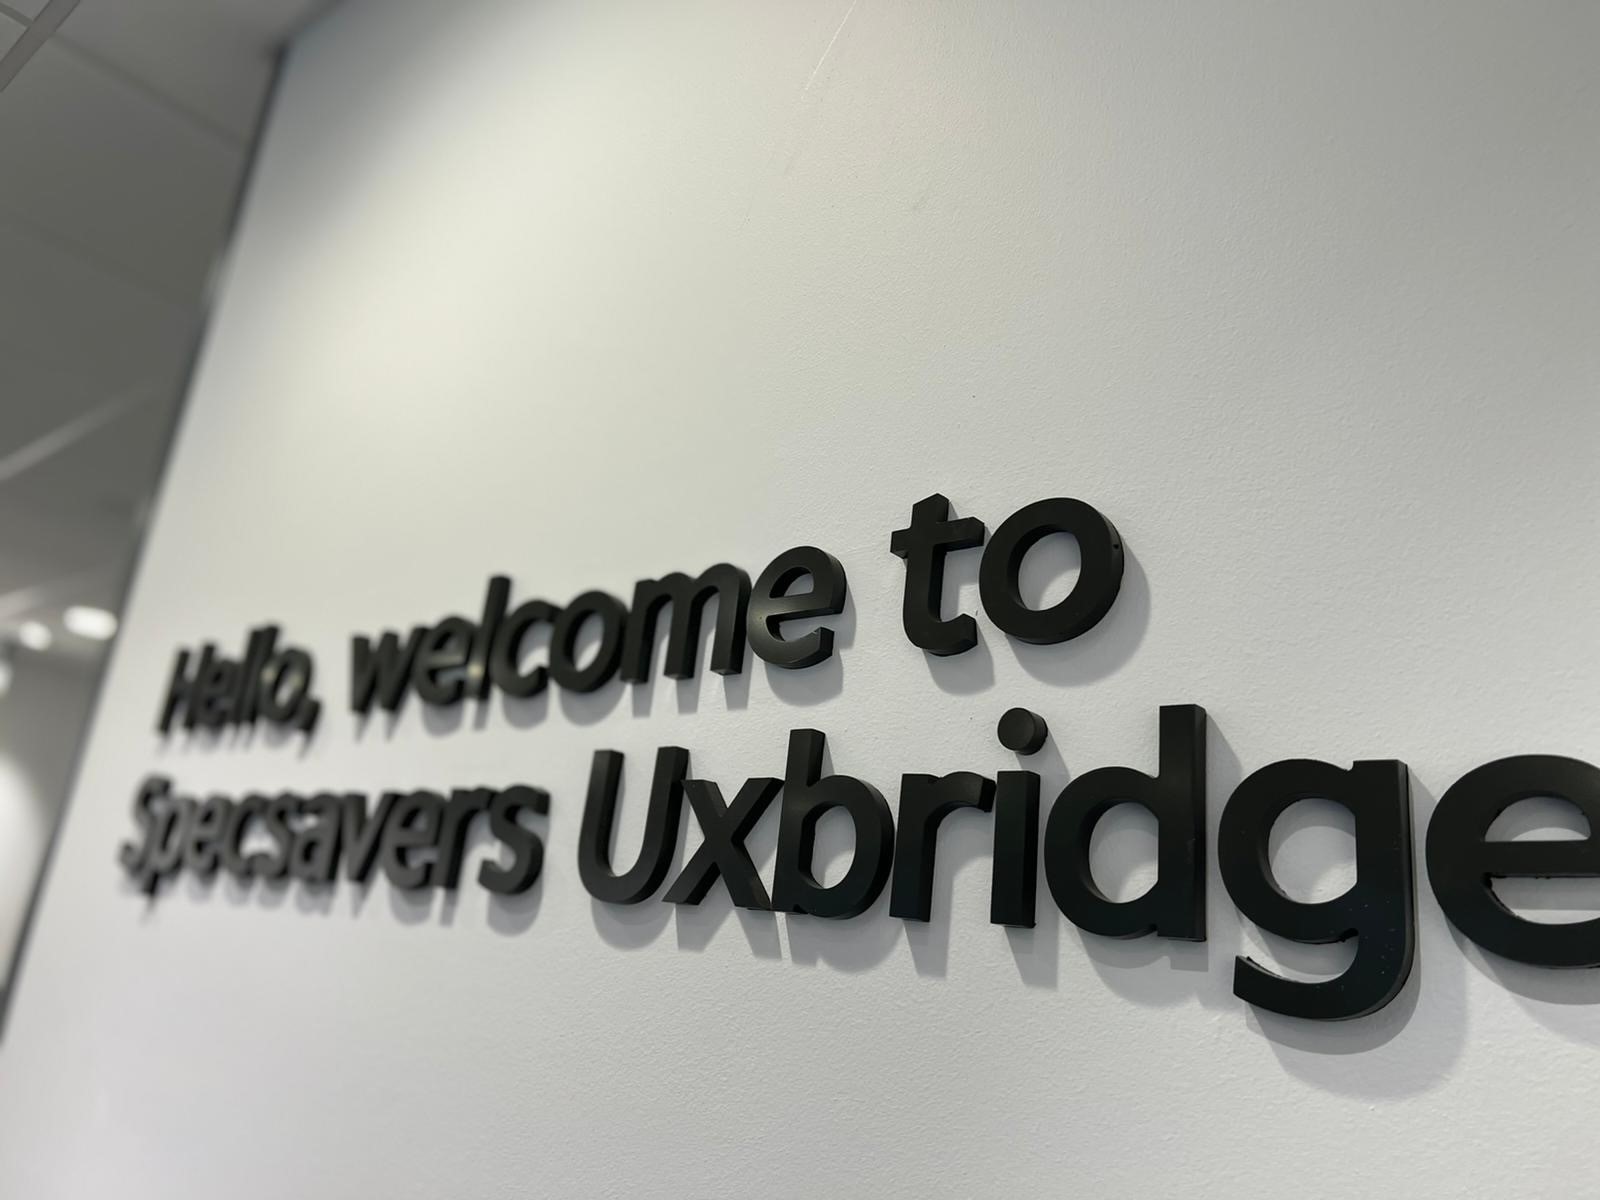 Images Specsavers Opticians and Audiologists - Uxbridge